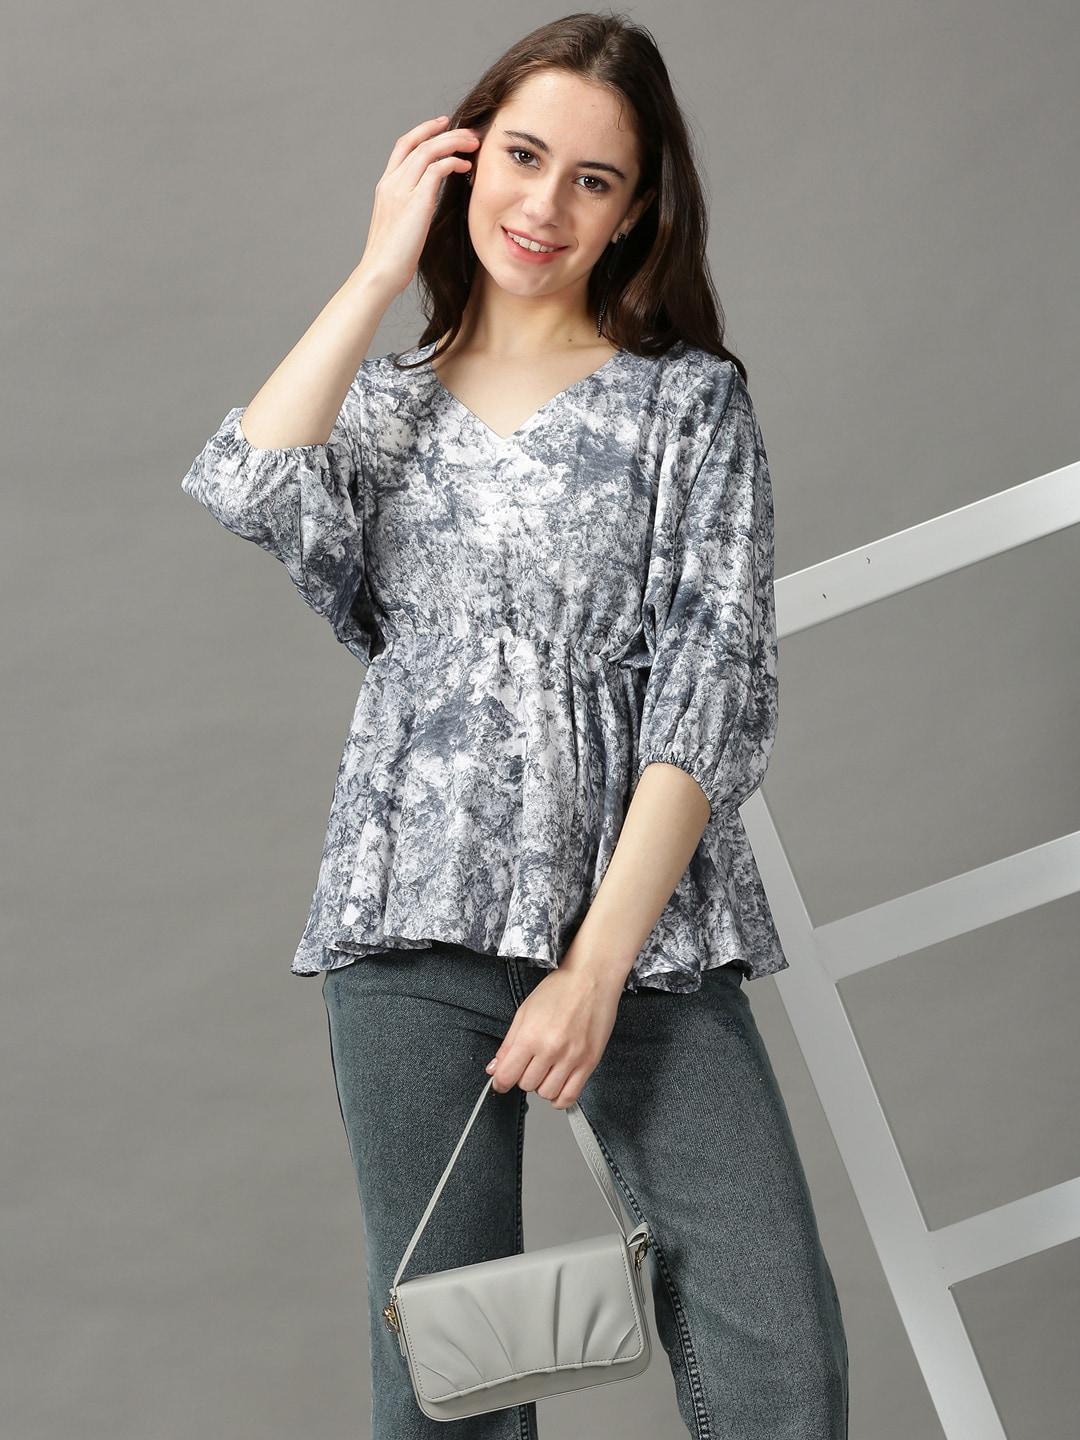 showoff-grey-&-off-white-print-crepe-empire-top